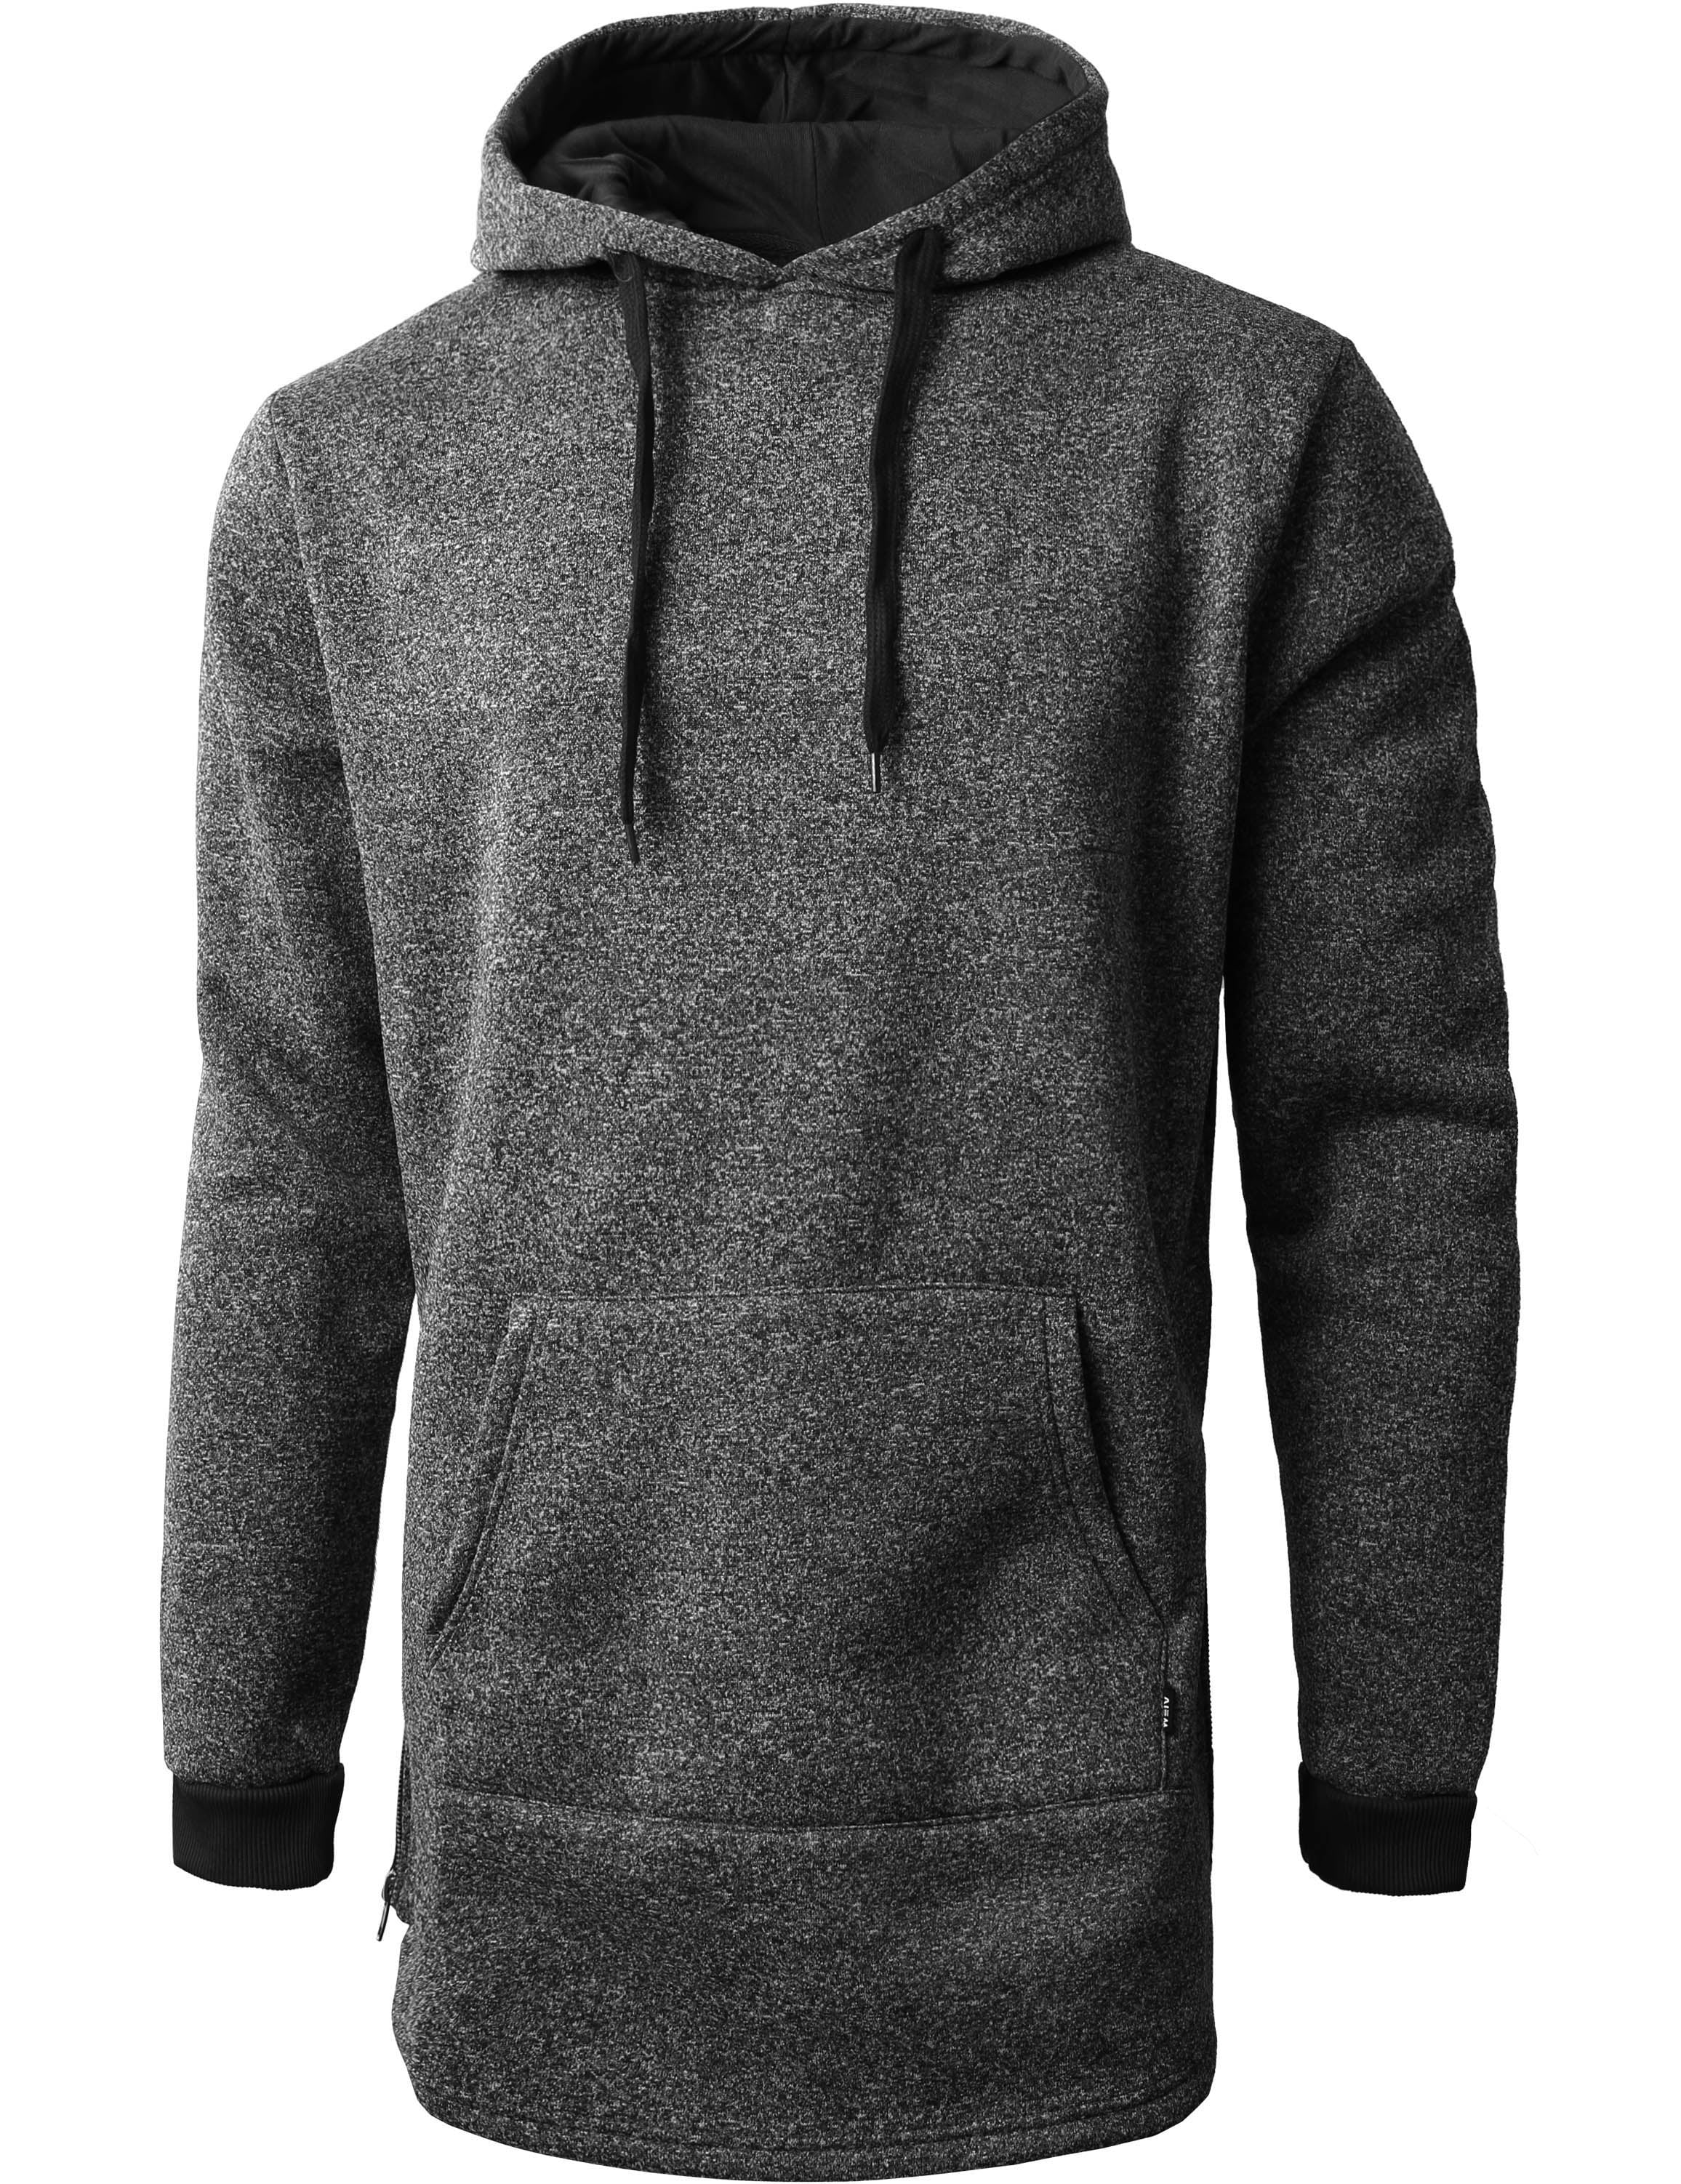 Ma Croix Mens Lightweight Marled Pullover Hoodie Texture Brushed Fleece ...